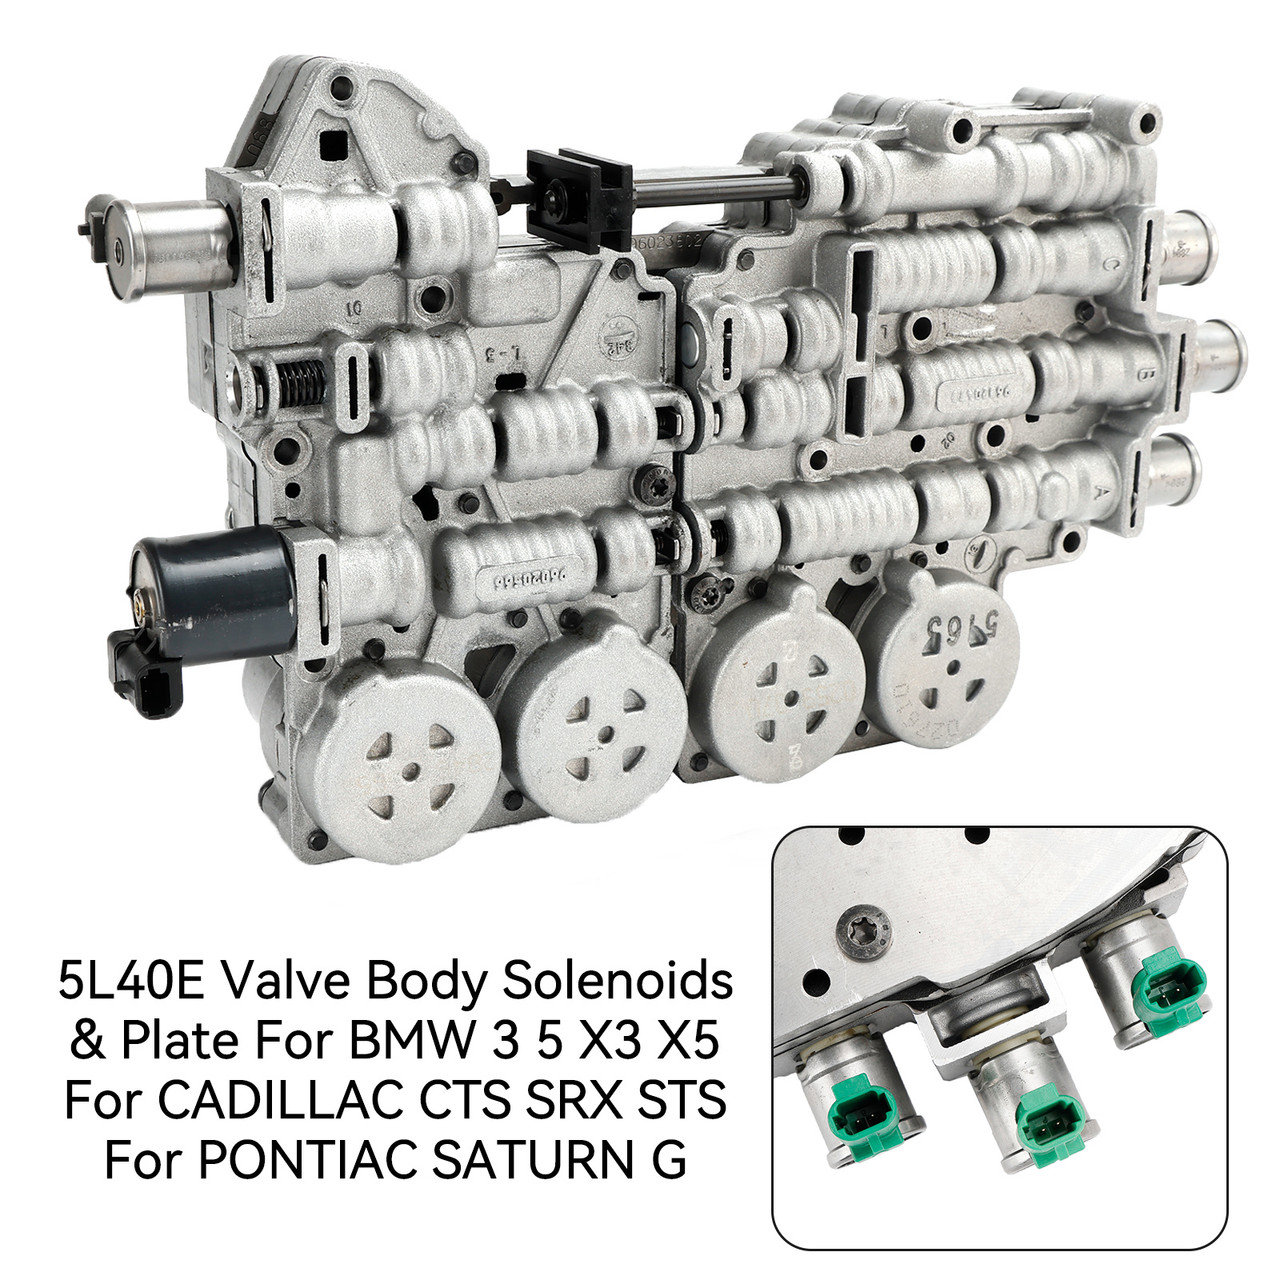 5L40E Valve Body Solenoids & Plate For BMW 3 5 X3 X5 For CADILLAC CTS SRX STS For PONTIAC SATURN G